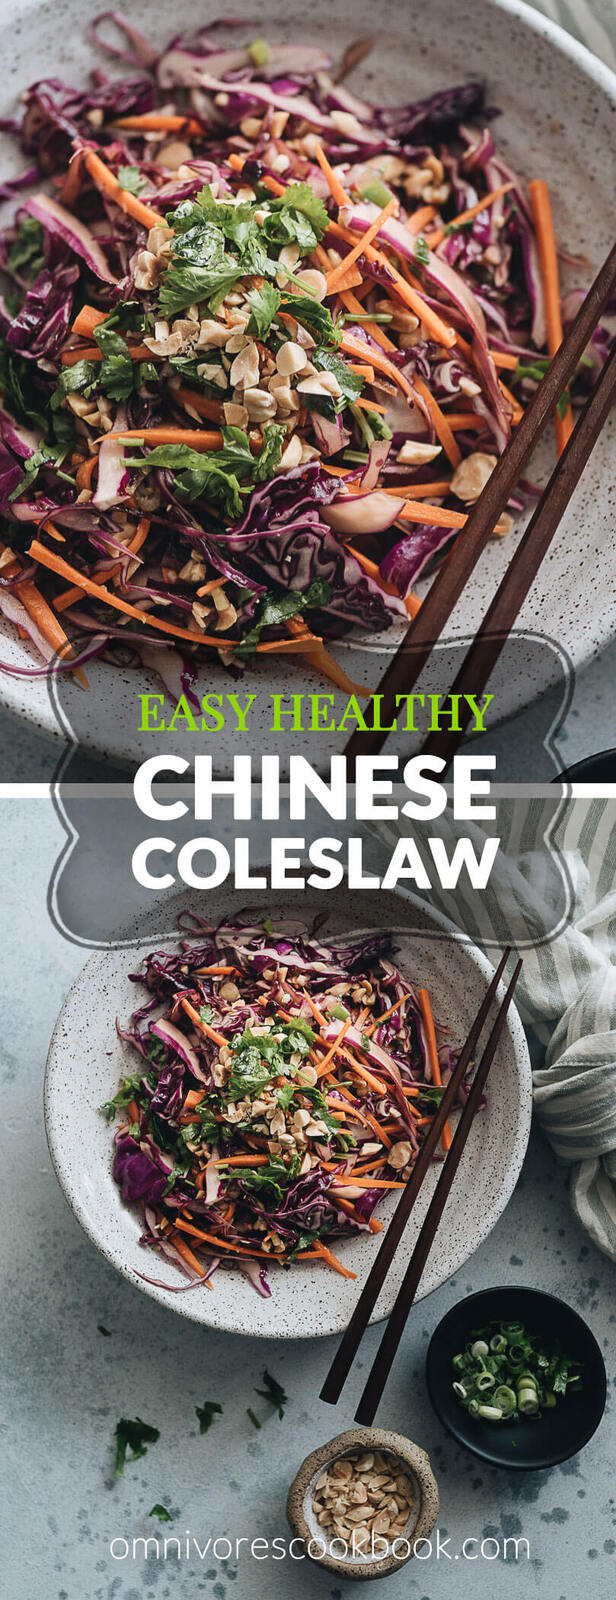 The Best Chinese Coleslaw - This healthy twist on Chinese coleslaw will be your new favorite side dish. The tangy yet sweet dressing mixed with the crispy texture will make it disappear fast at any gathering. #easy #recipes #soysauce #glutenfree